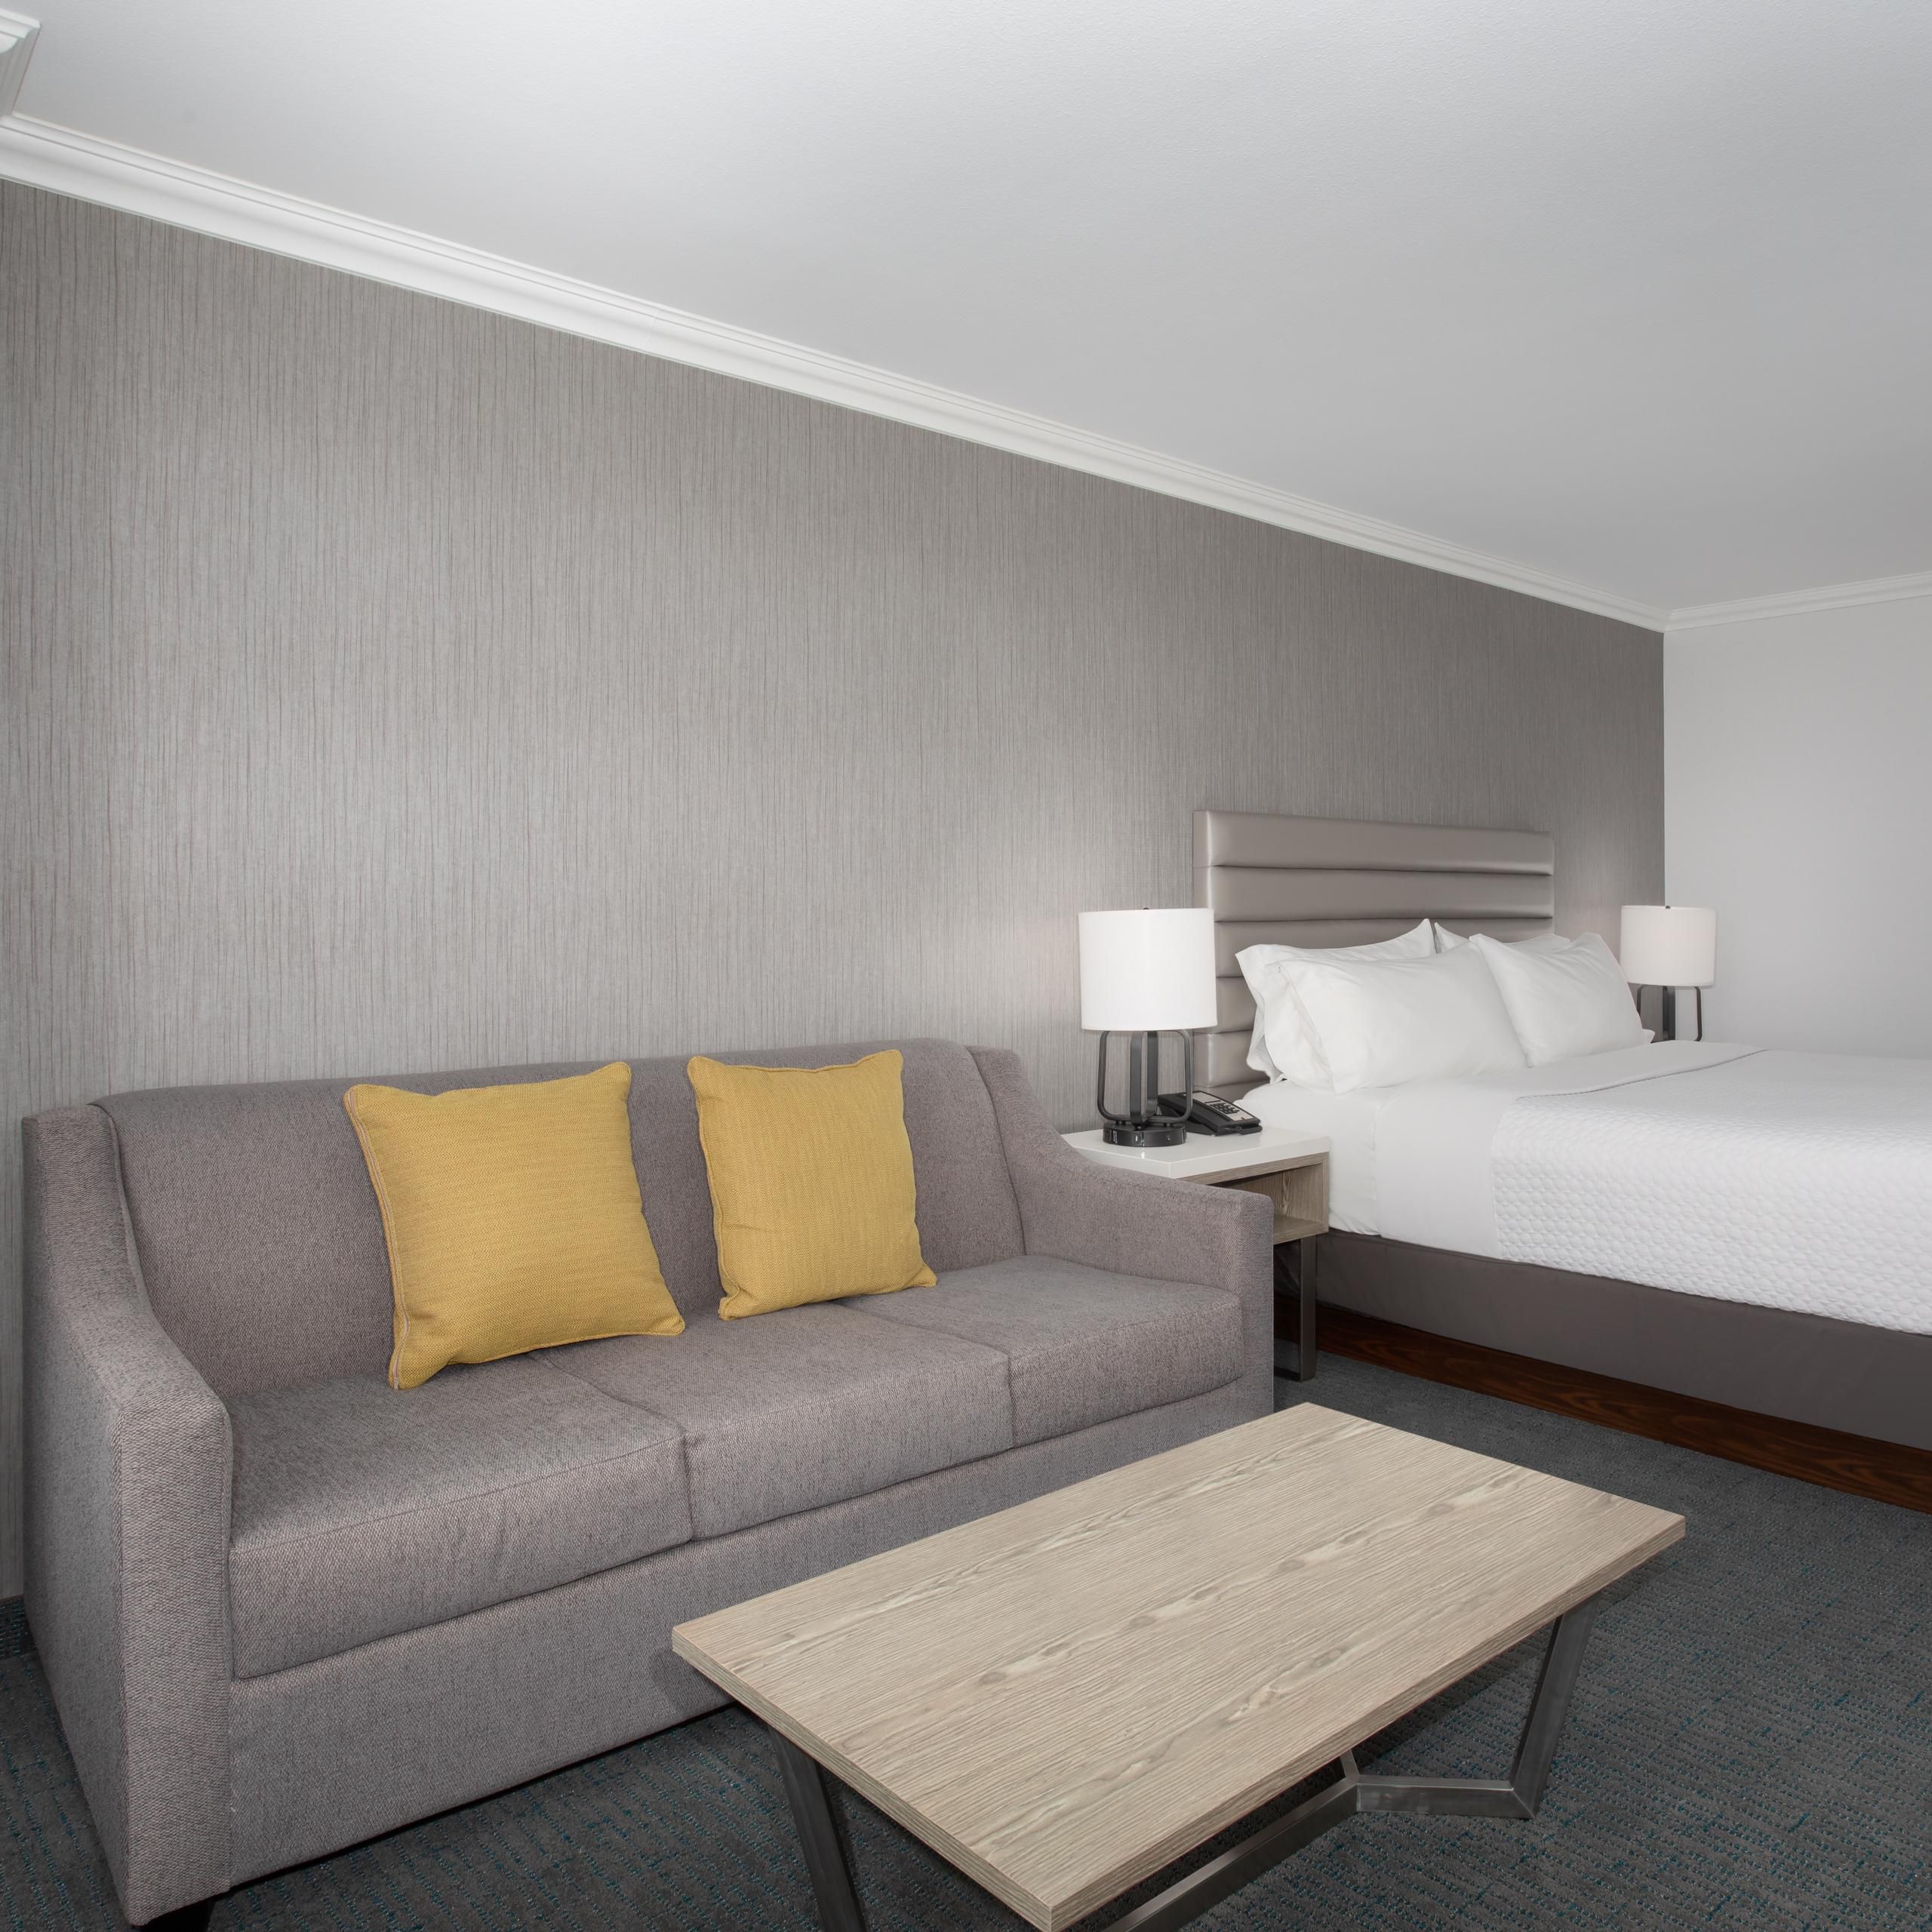 At the end of a long day, relax in our clean, fresh guest rooms. 